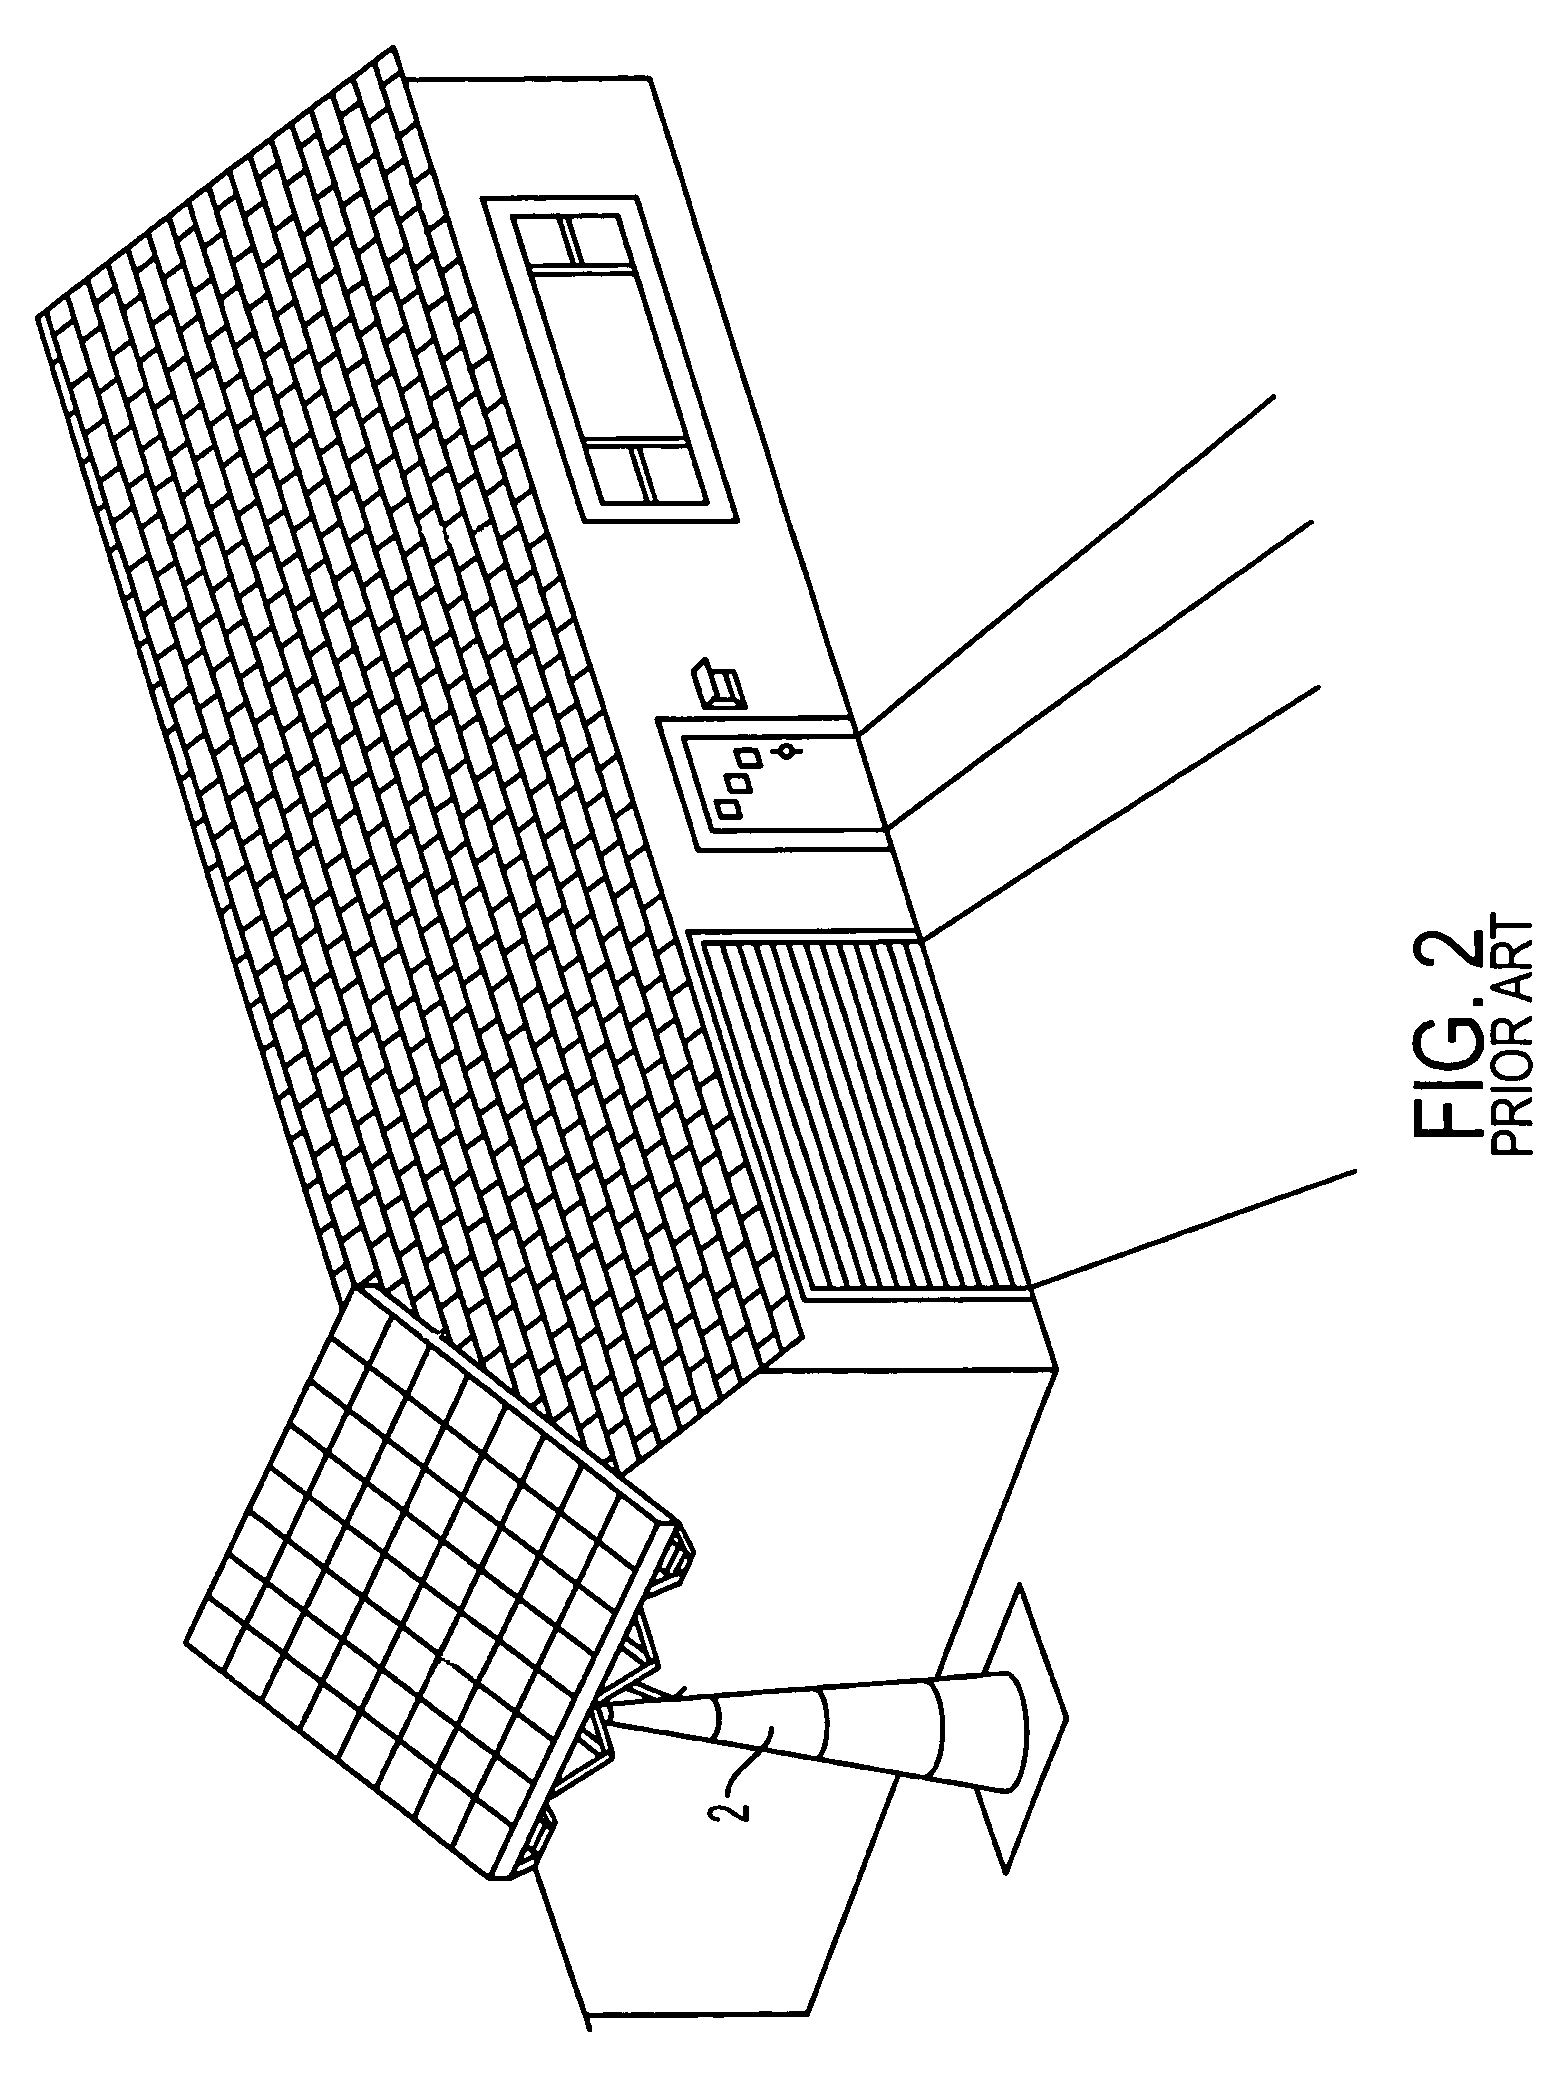 Concentrating type solar collection and daylighting system within glazed building envelopes